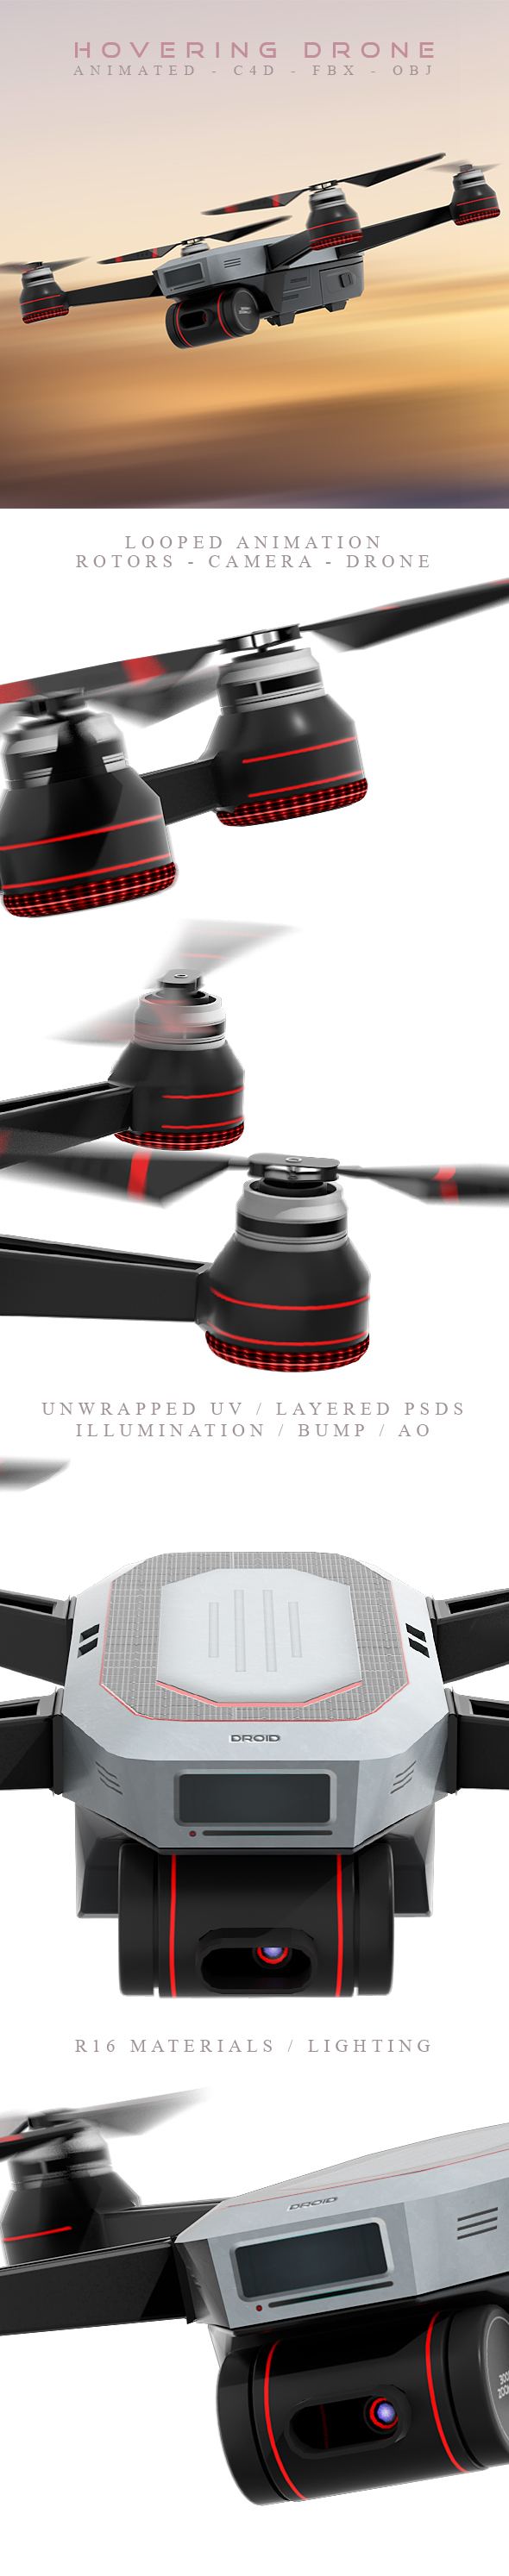 Animated Hovering Drone - 3Docean 21161587